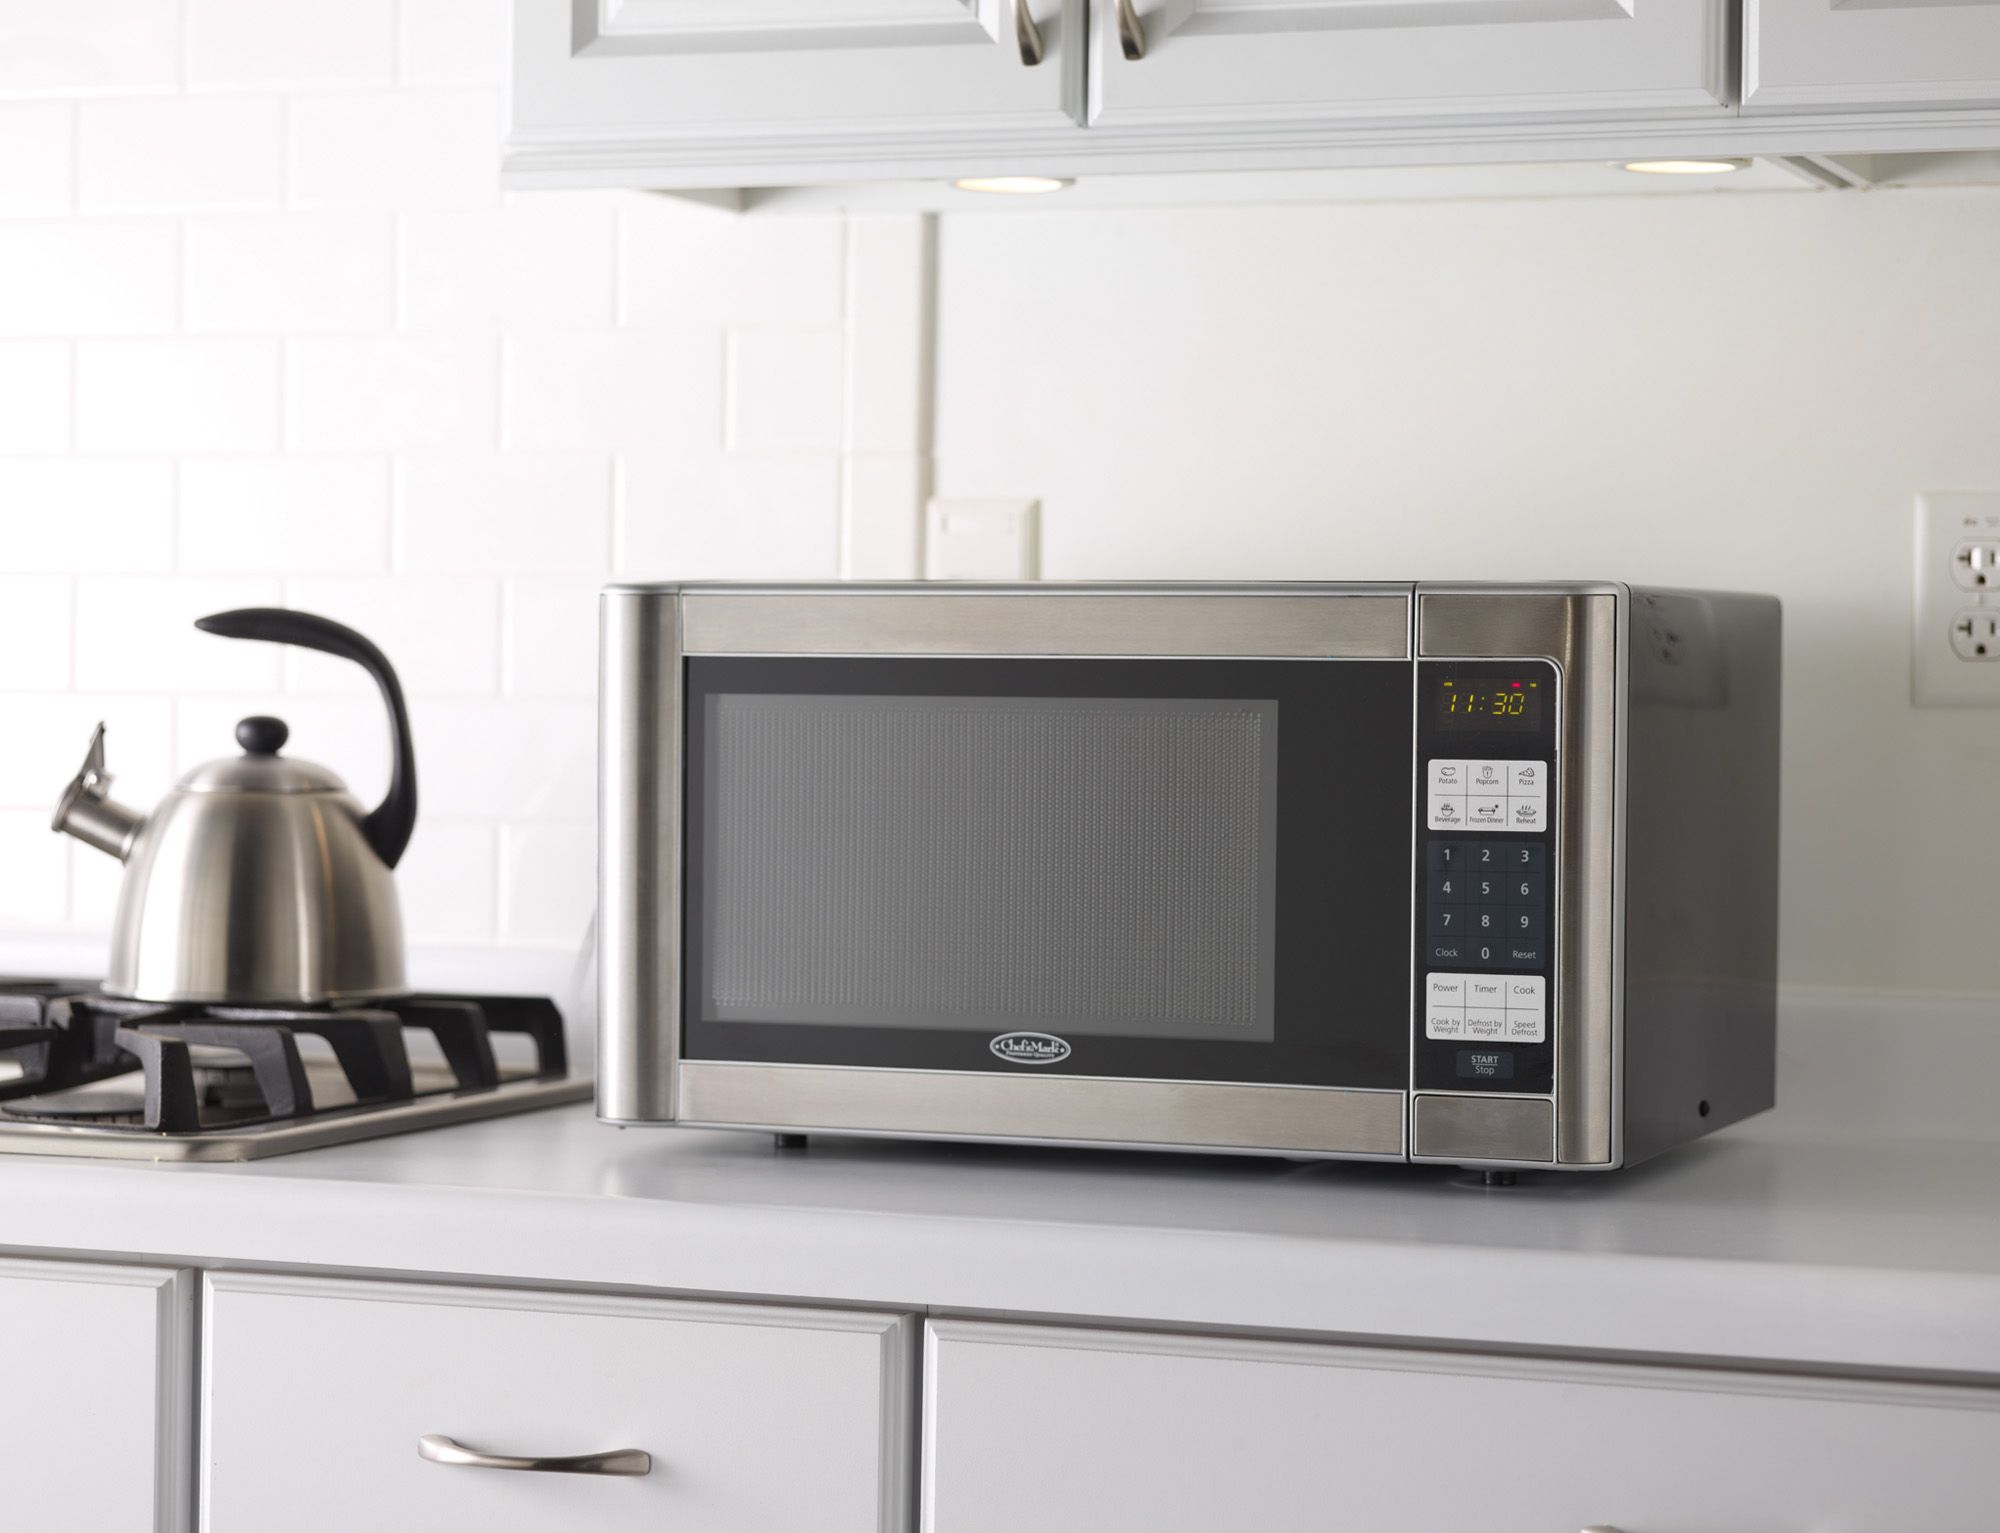 Fingerhut - Oster 1.3 Cu. Ft. 1000-Watt Countertop Microwave Oven with  Stainless Steel Front